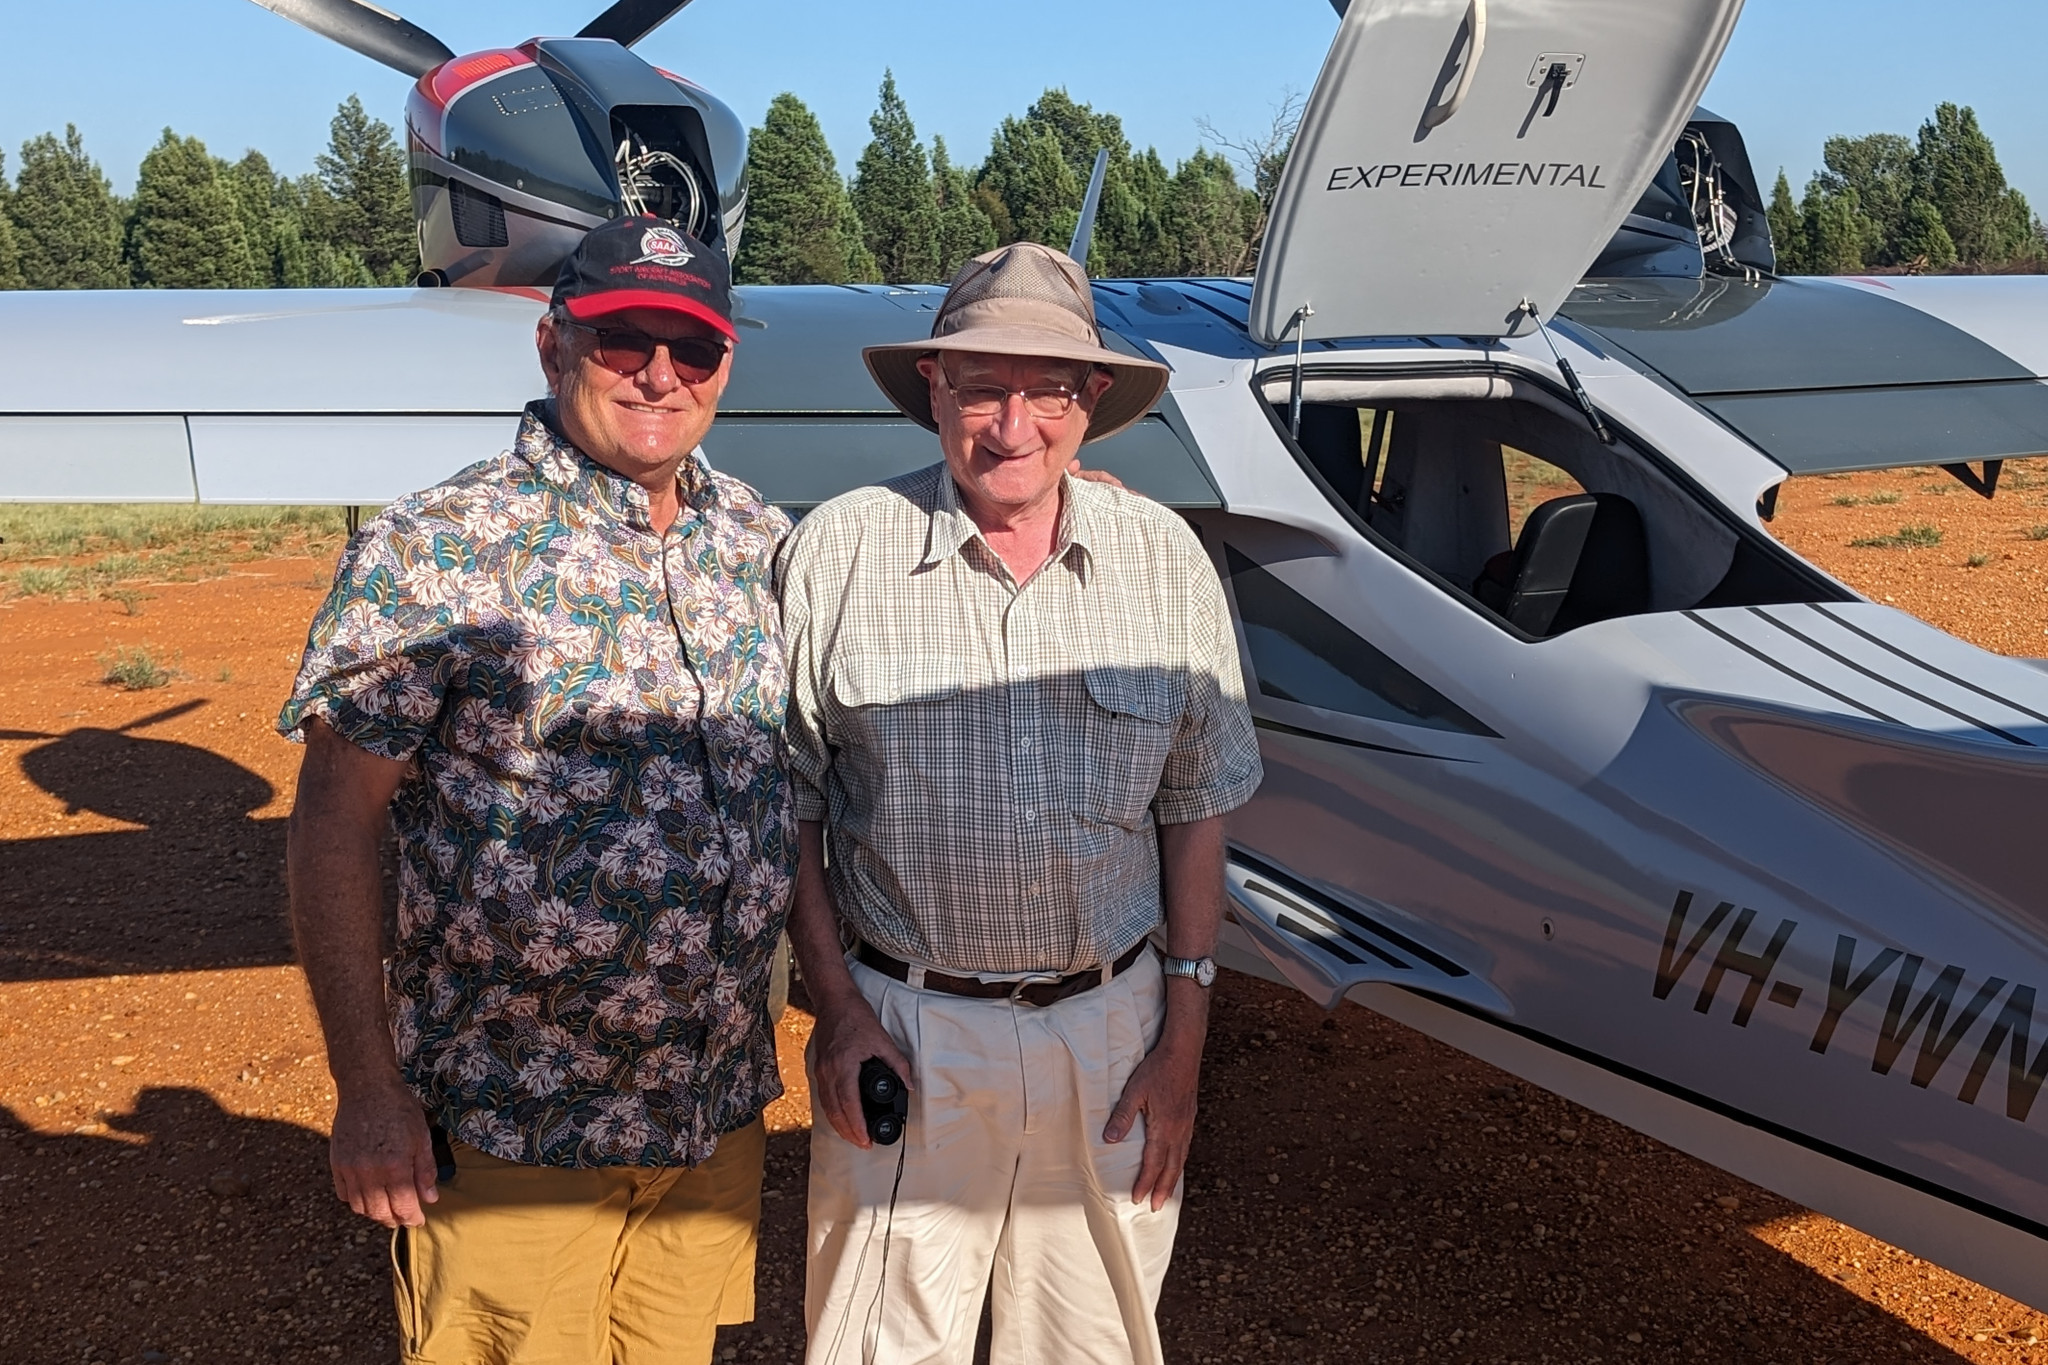 Dr Brett Thompson and Dr Patrick Giltrap recently took to the skies above Gilgandra. Inset: The two doctors in the cockpit of the Seabear L-45 Amphibian. Photos courtesy of Tim McClelland.